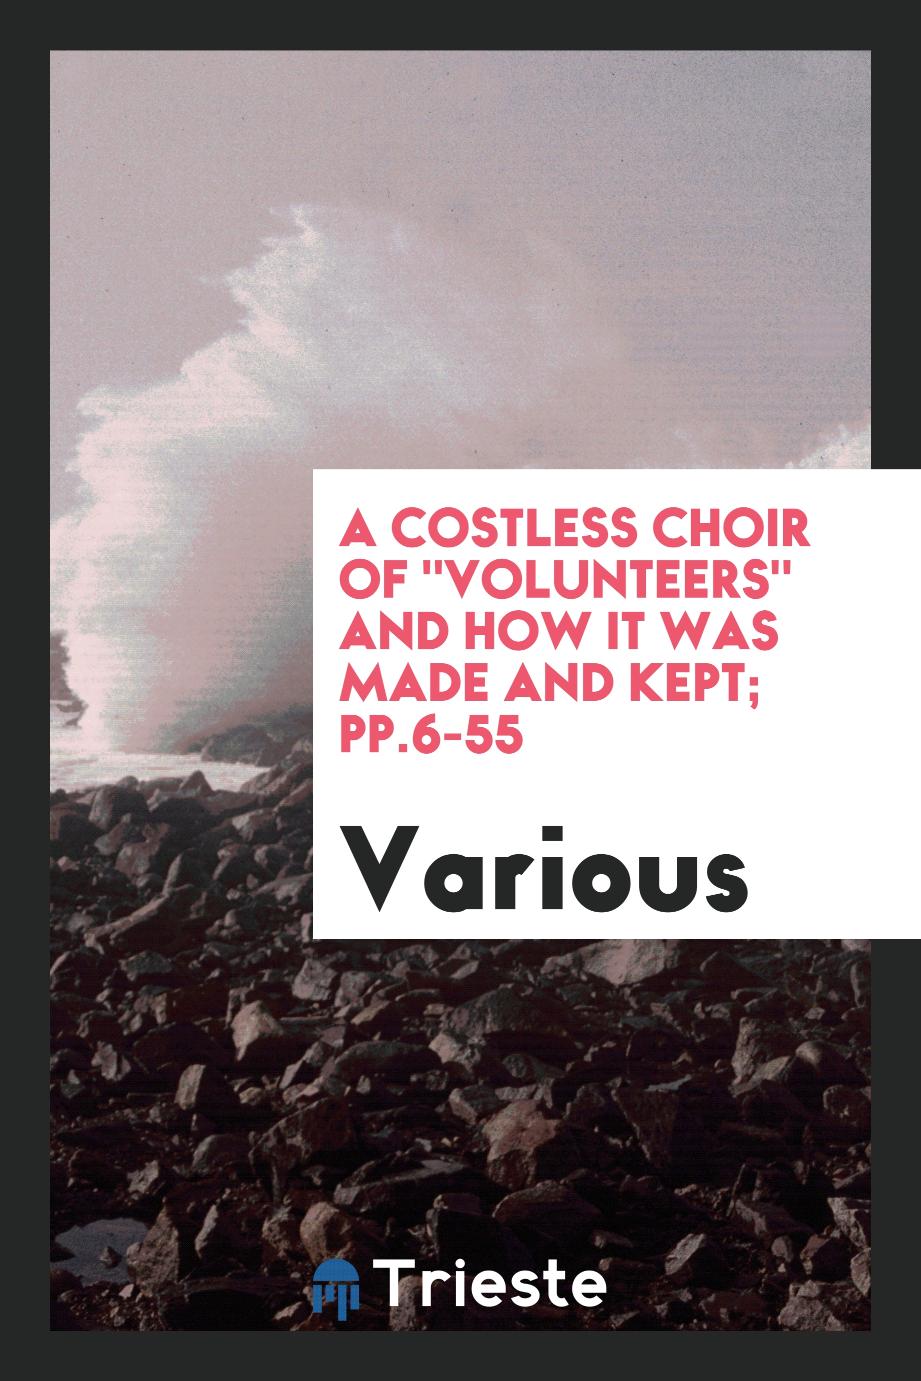 A costless choir of "volunteers" and how it was made and kept; pp.6-55